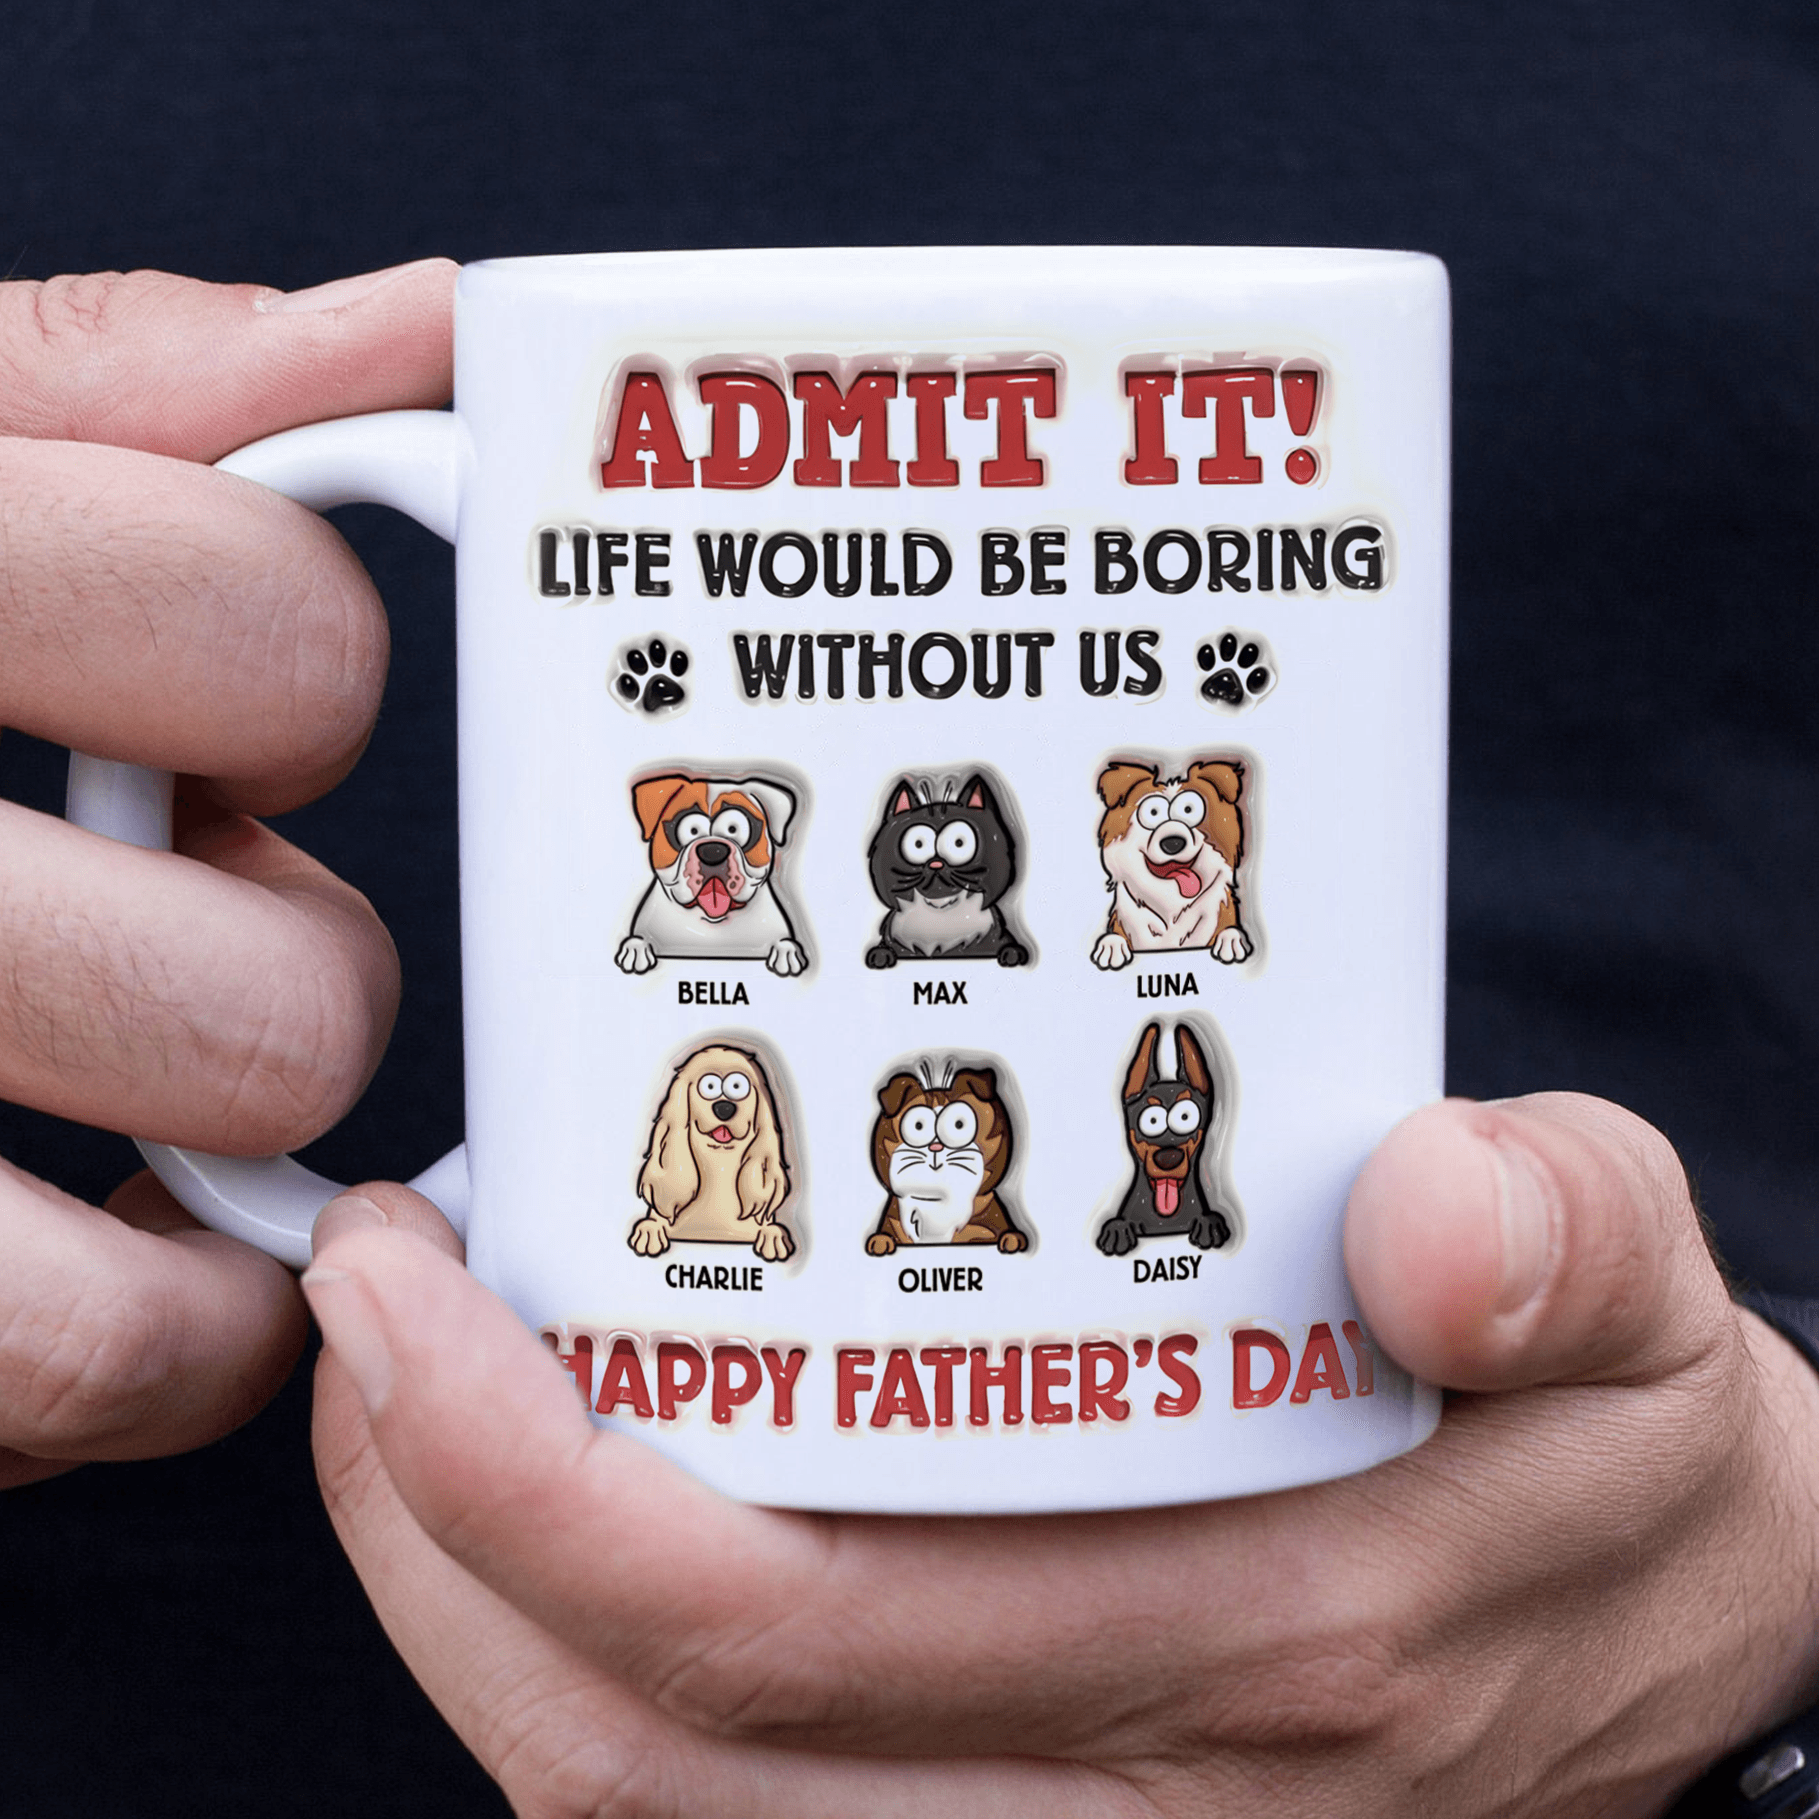 Admit It Life Would Be Boring Without Us - Personalized 3D Inflated Effect Printed Mug - Father's Day, Gift For Pet Owners, Pet Lovers